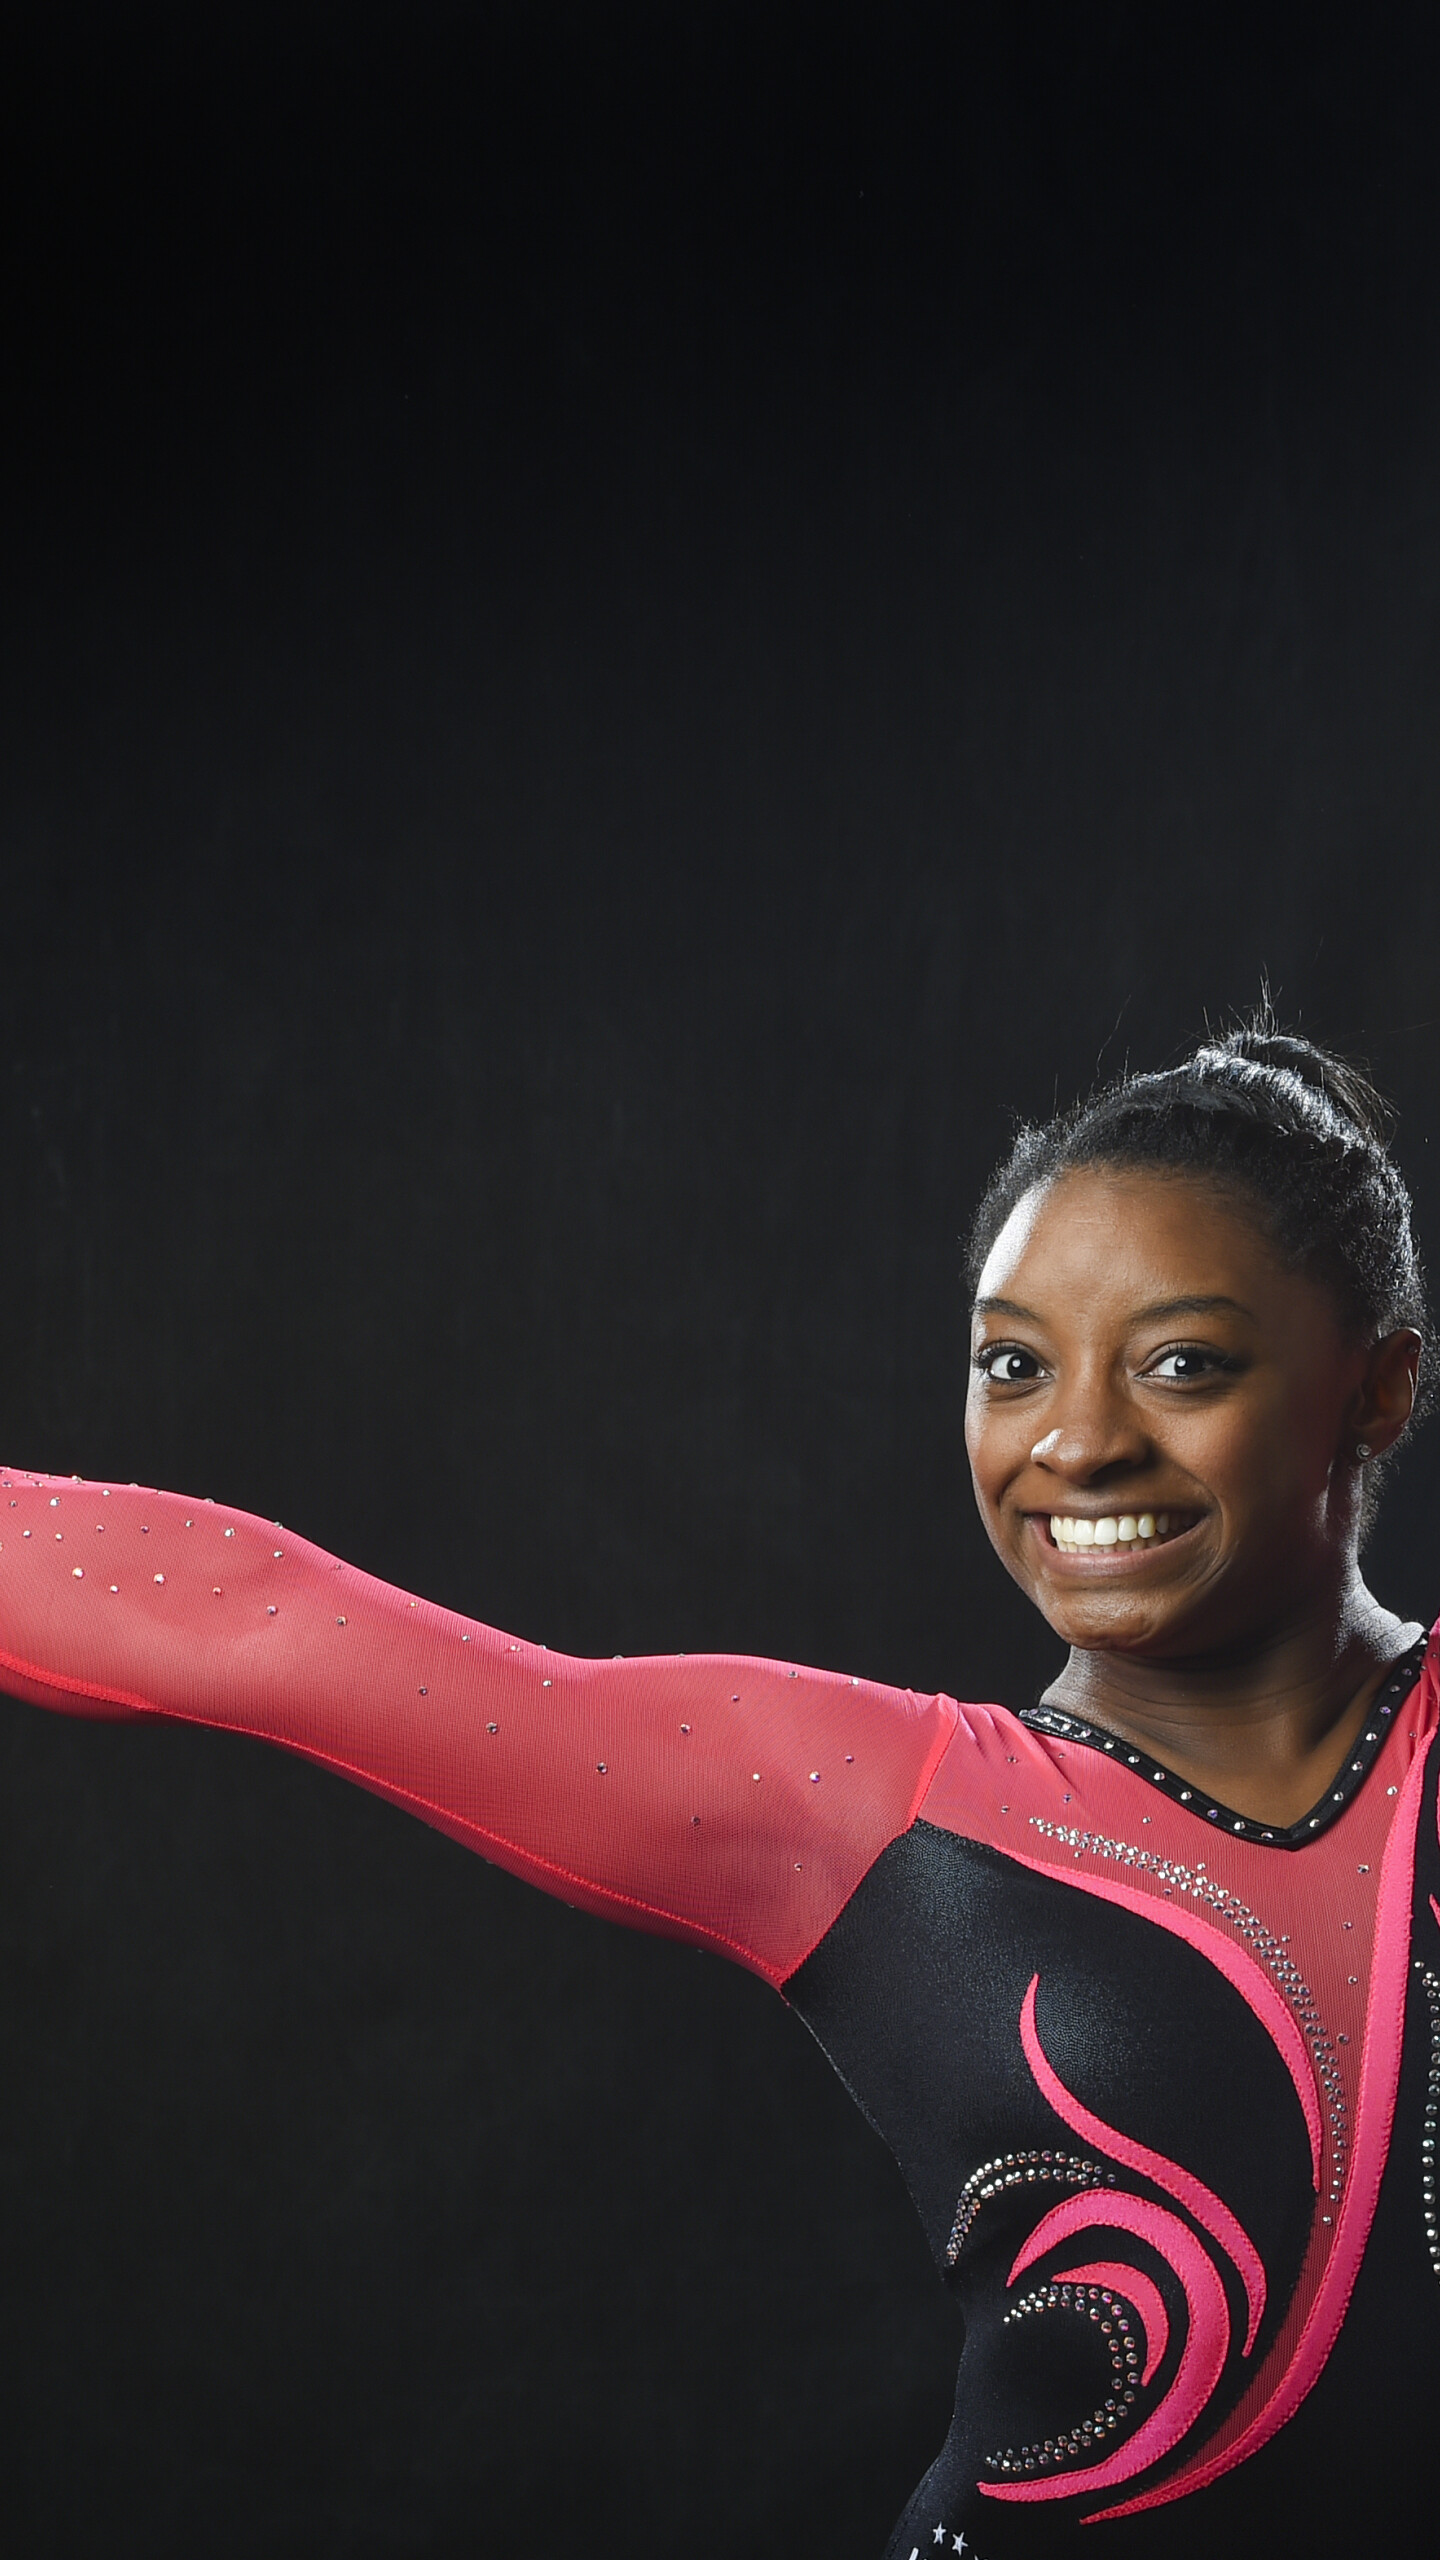 Simone Biles: She was crowned the national all-around champion at the 2013 USA Gymnastics National Championships. 1440x2560 HD Wallpaper.